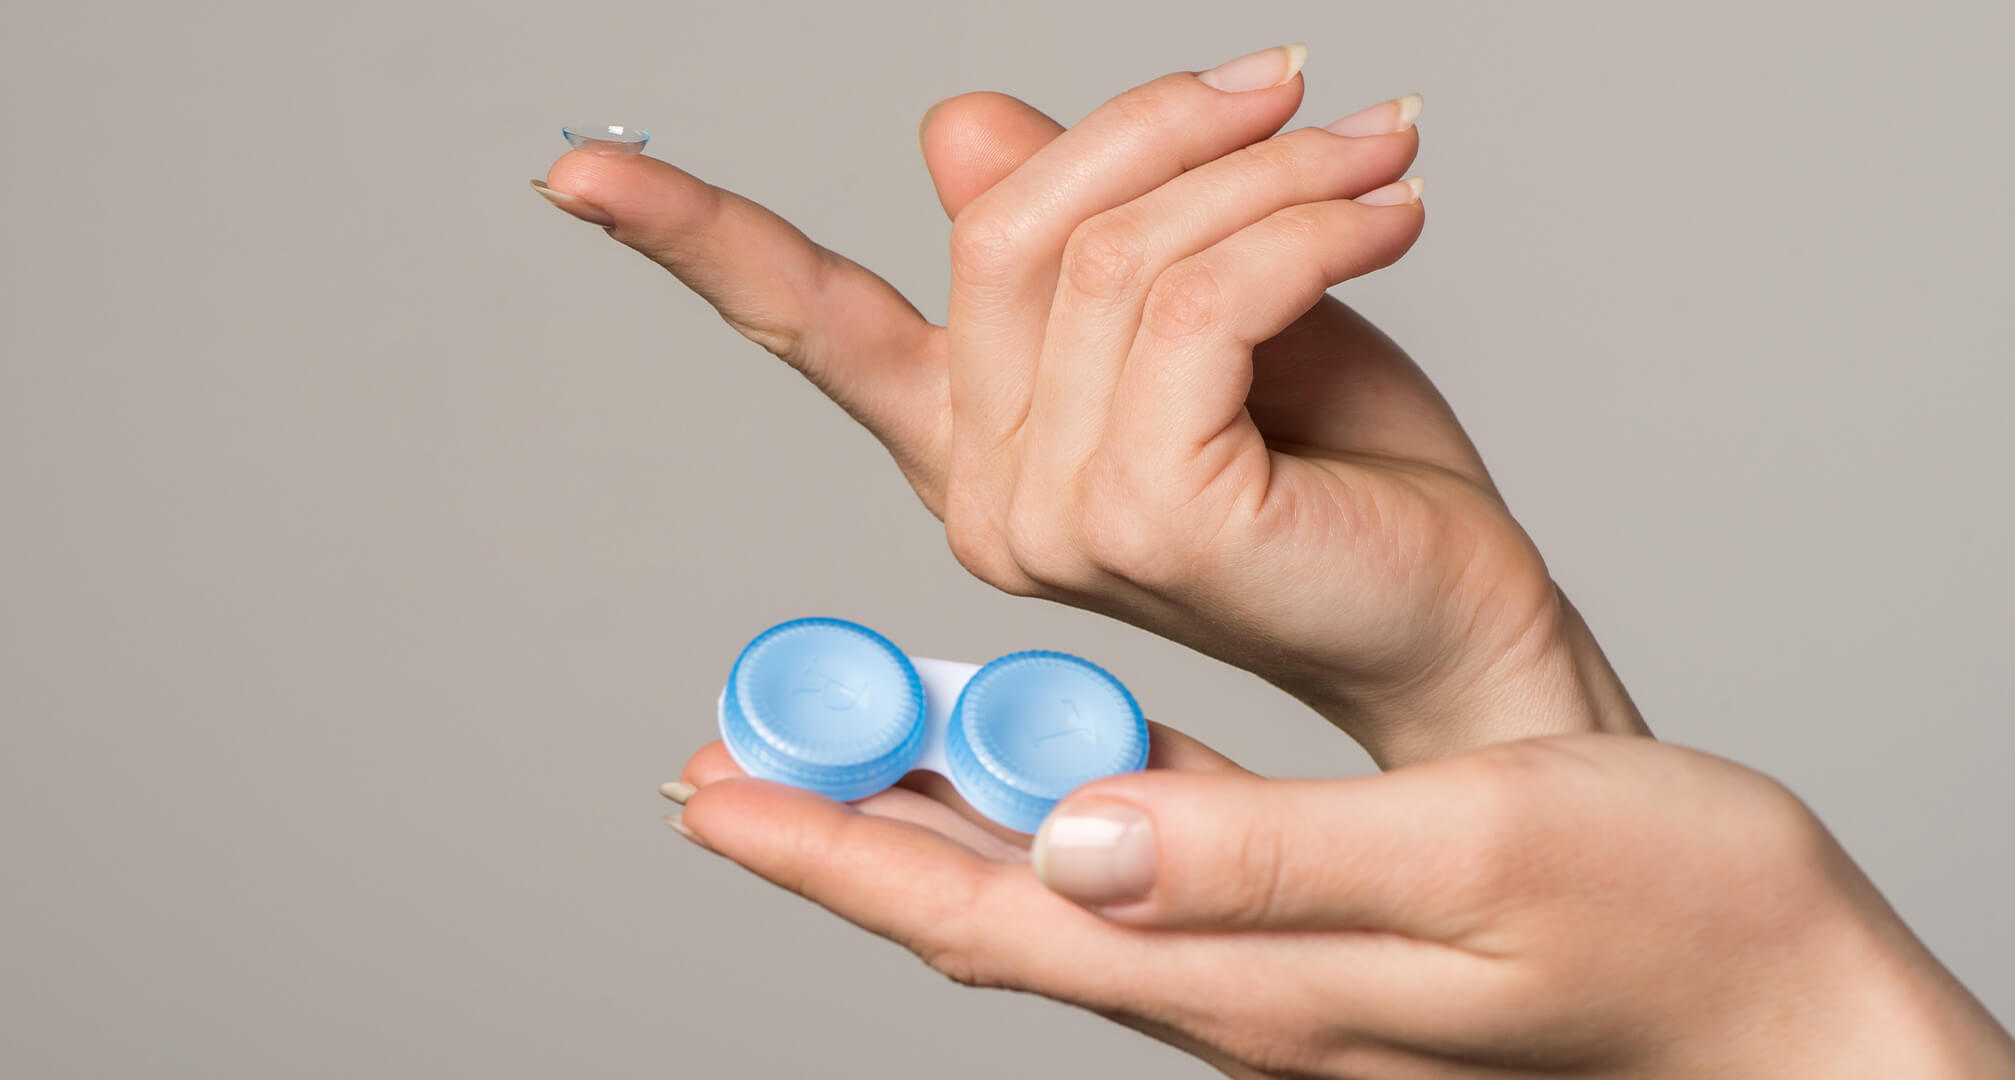 Multifocal contact lenses